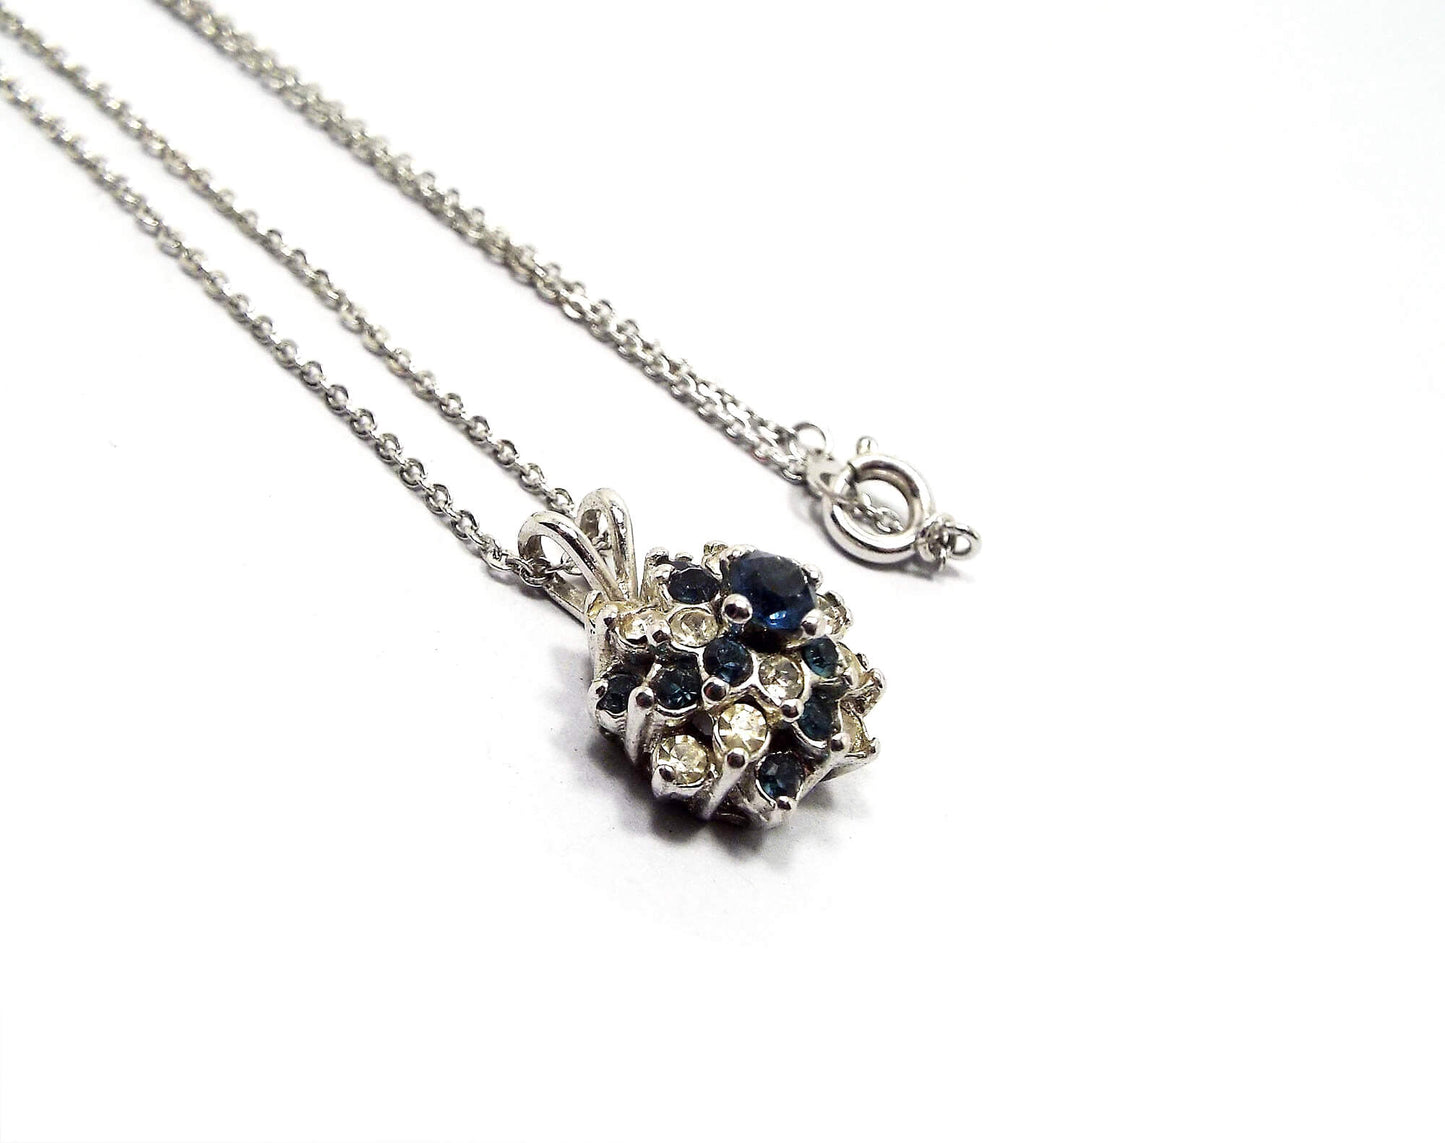 Small Clear and Dark Blue Rhinestone Vintage Pendant Necklace